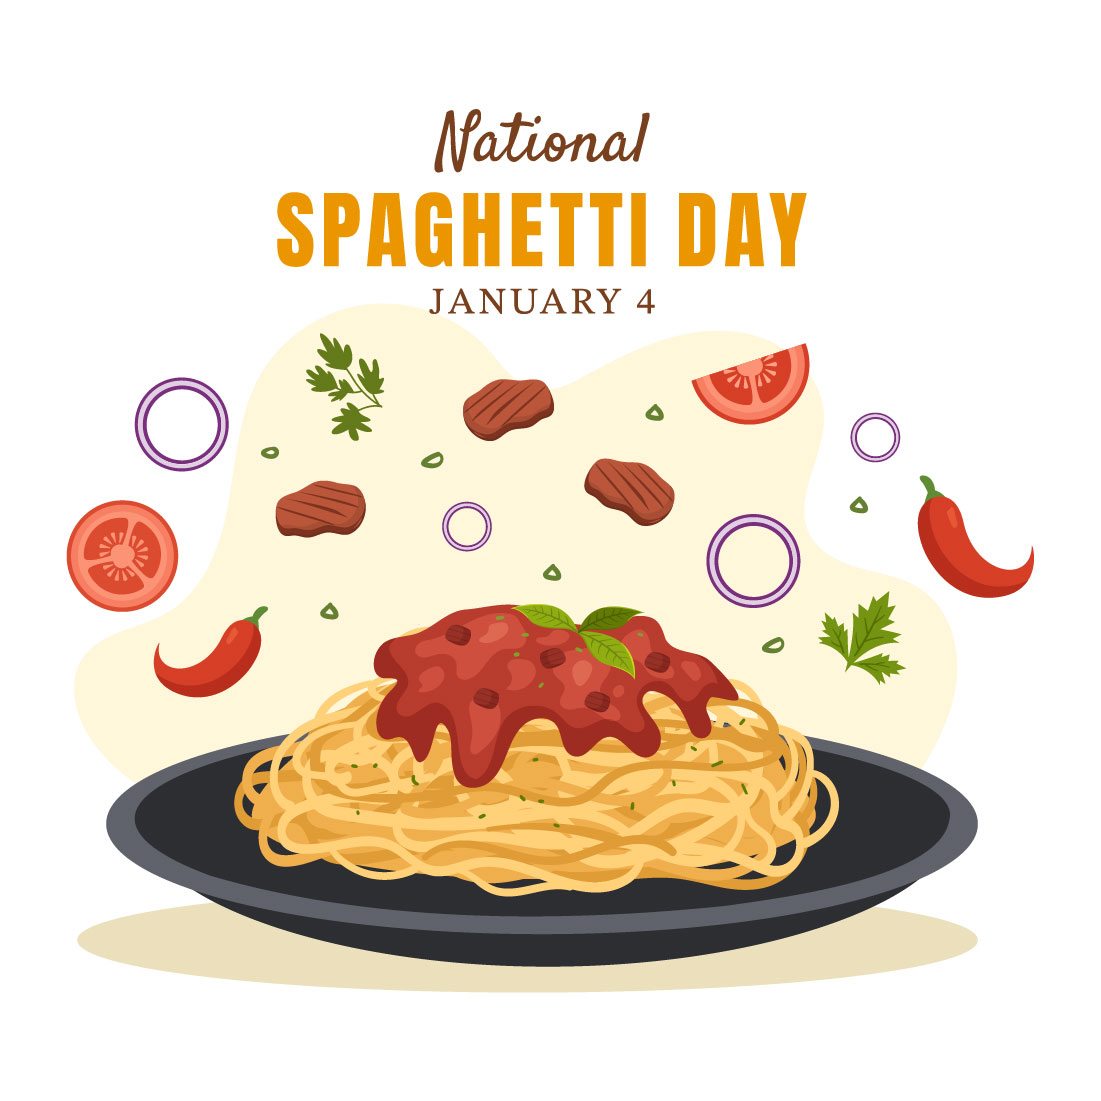 14 National Spaghetti Day Illustration - main image preview.